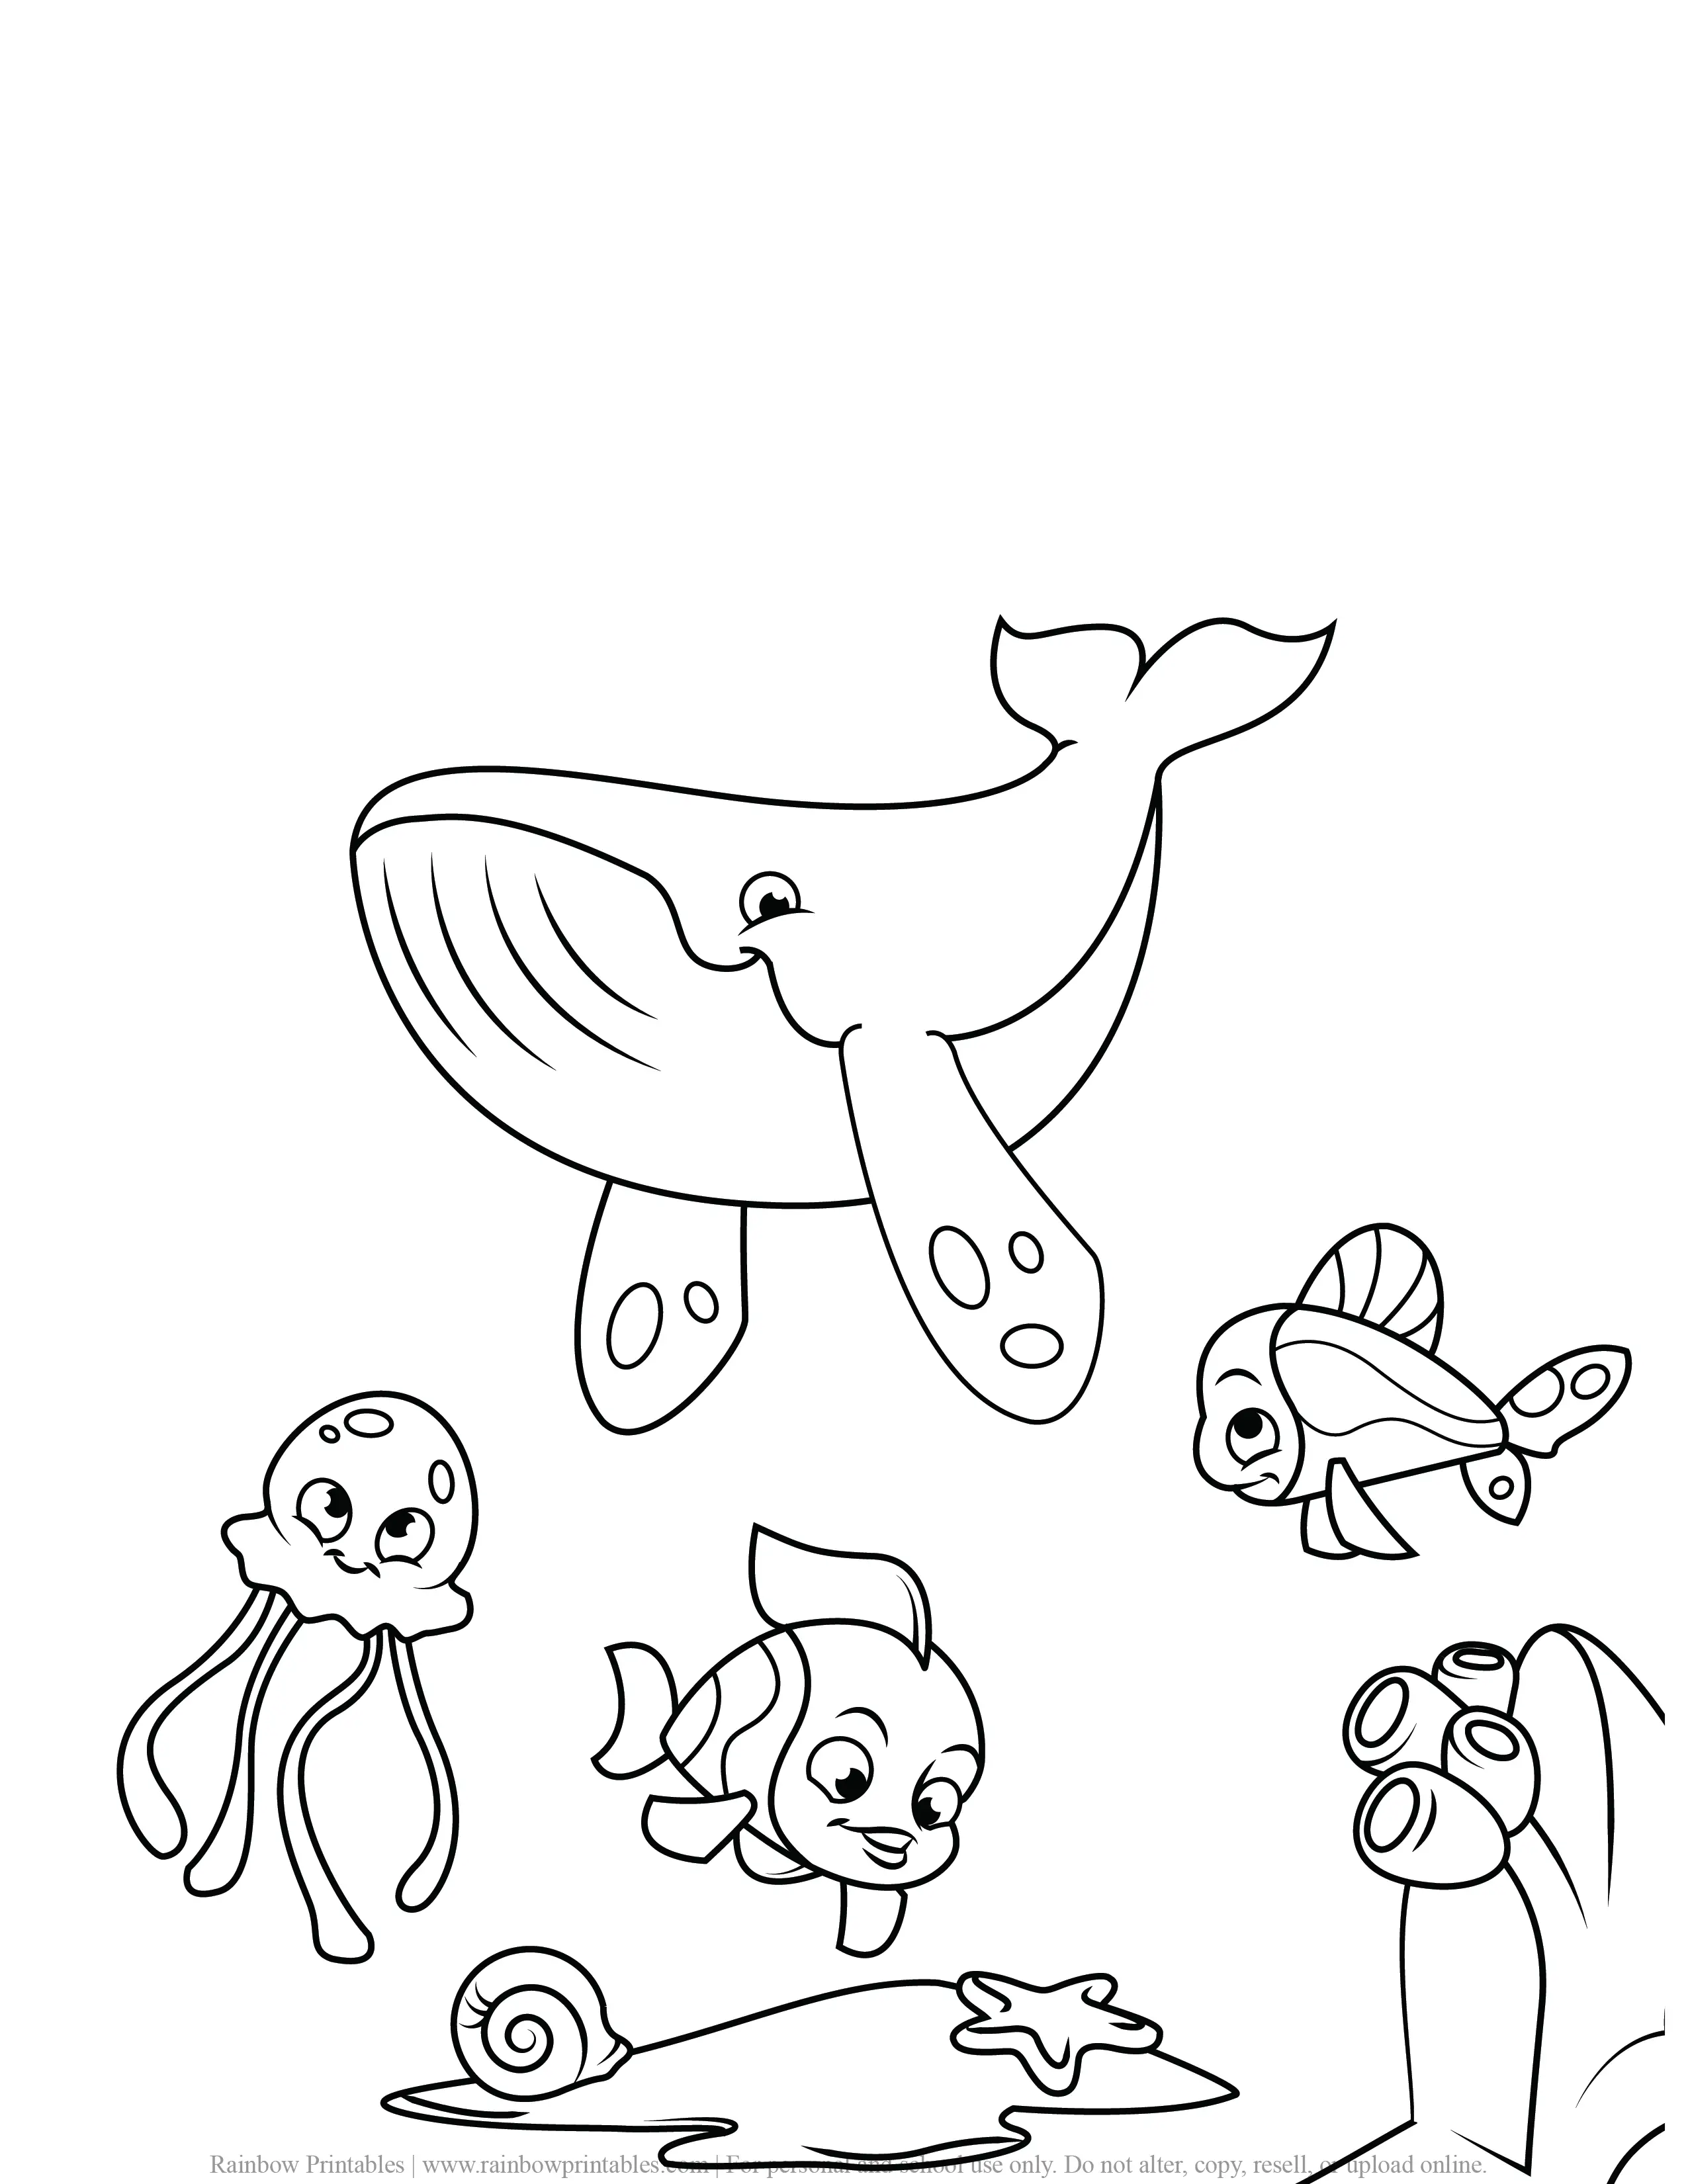 UNDER THE SEA SHARK WHALE COLORING PAGES FOR KIDS PRINTABLE ACTIVITY